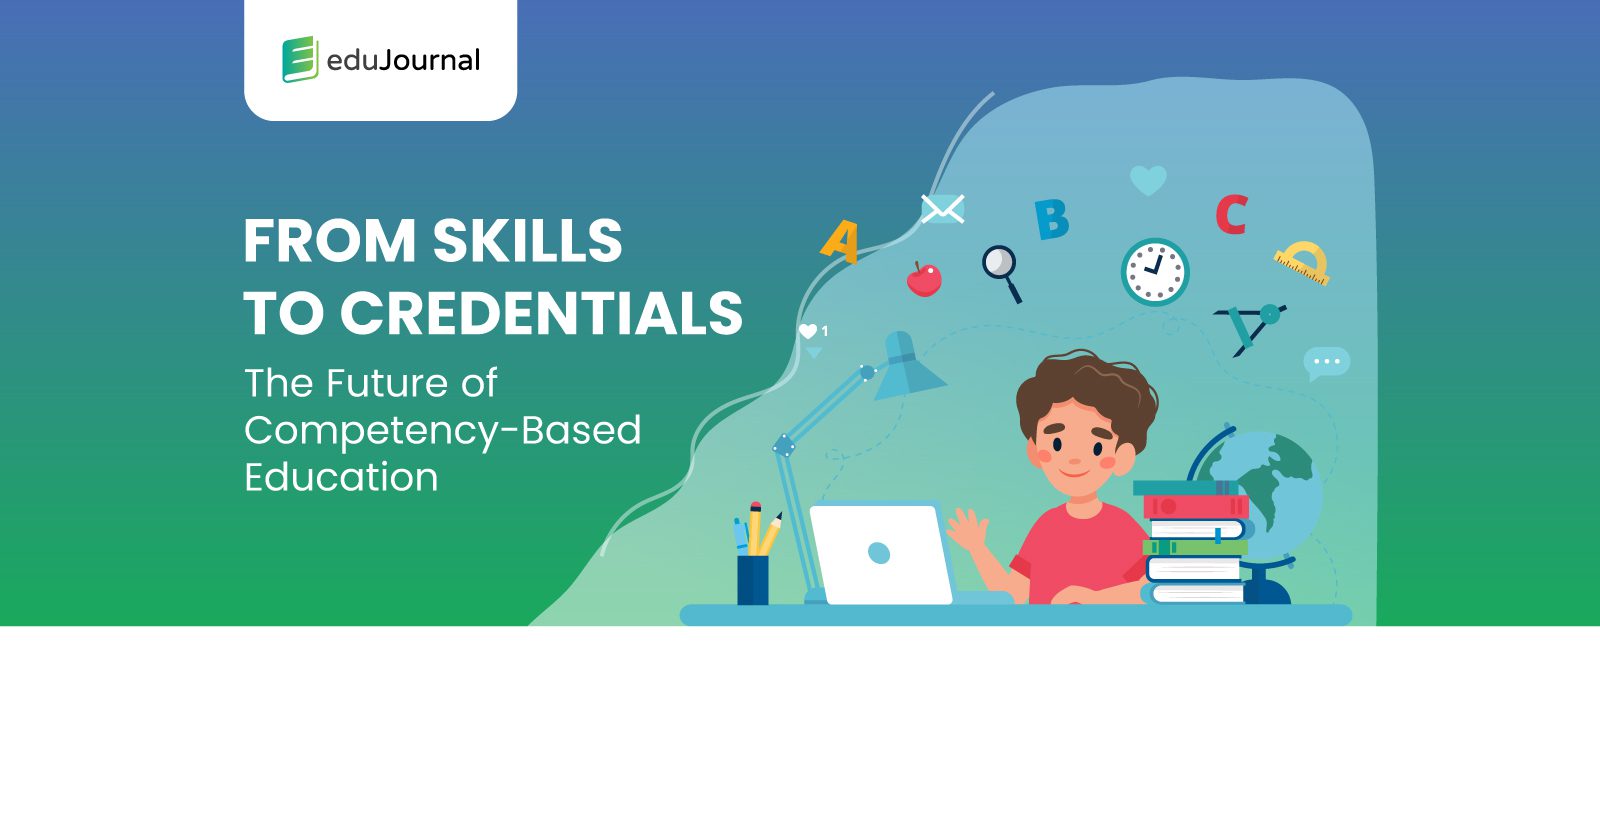 From Skills to Credentials: The Future of Competency-Based Education